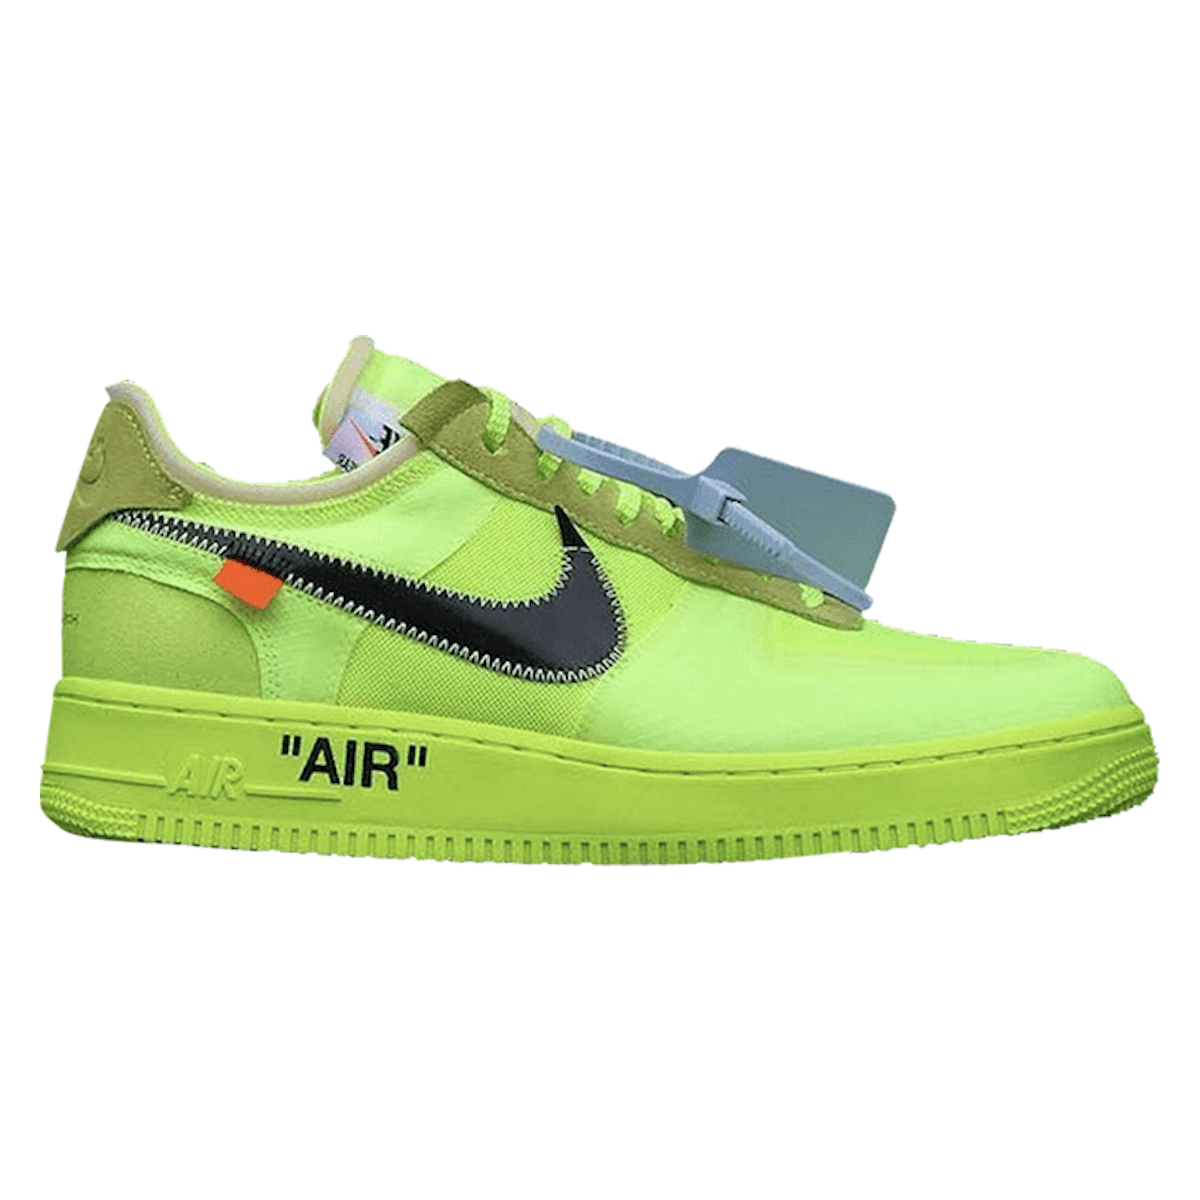 OFF-WHITE x Nike Air Force 1 Low "Volt"